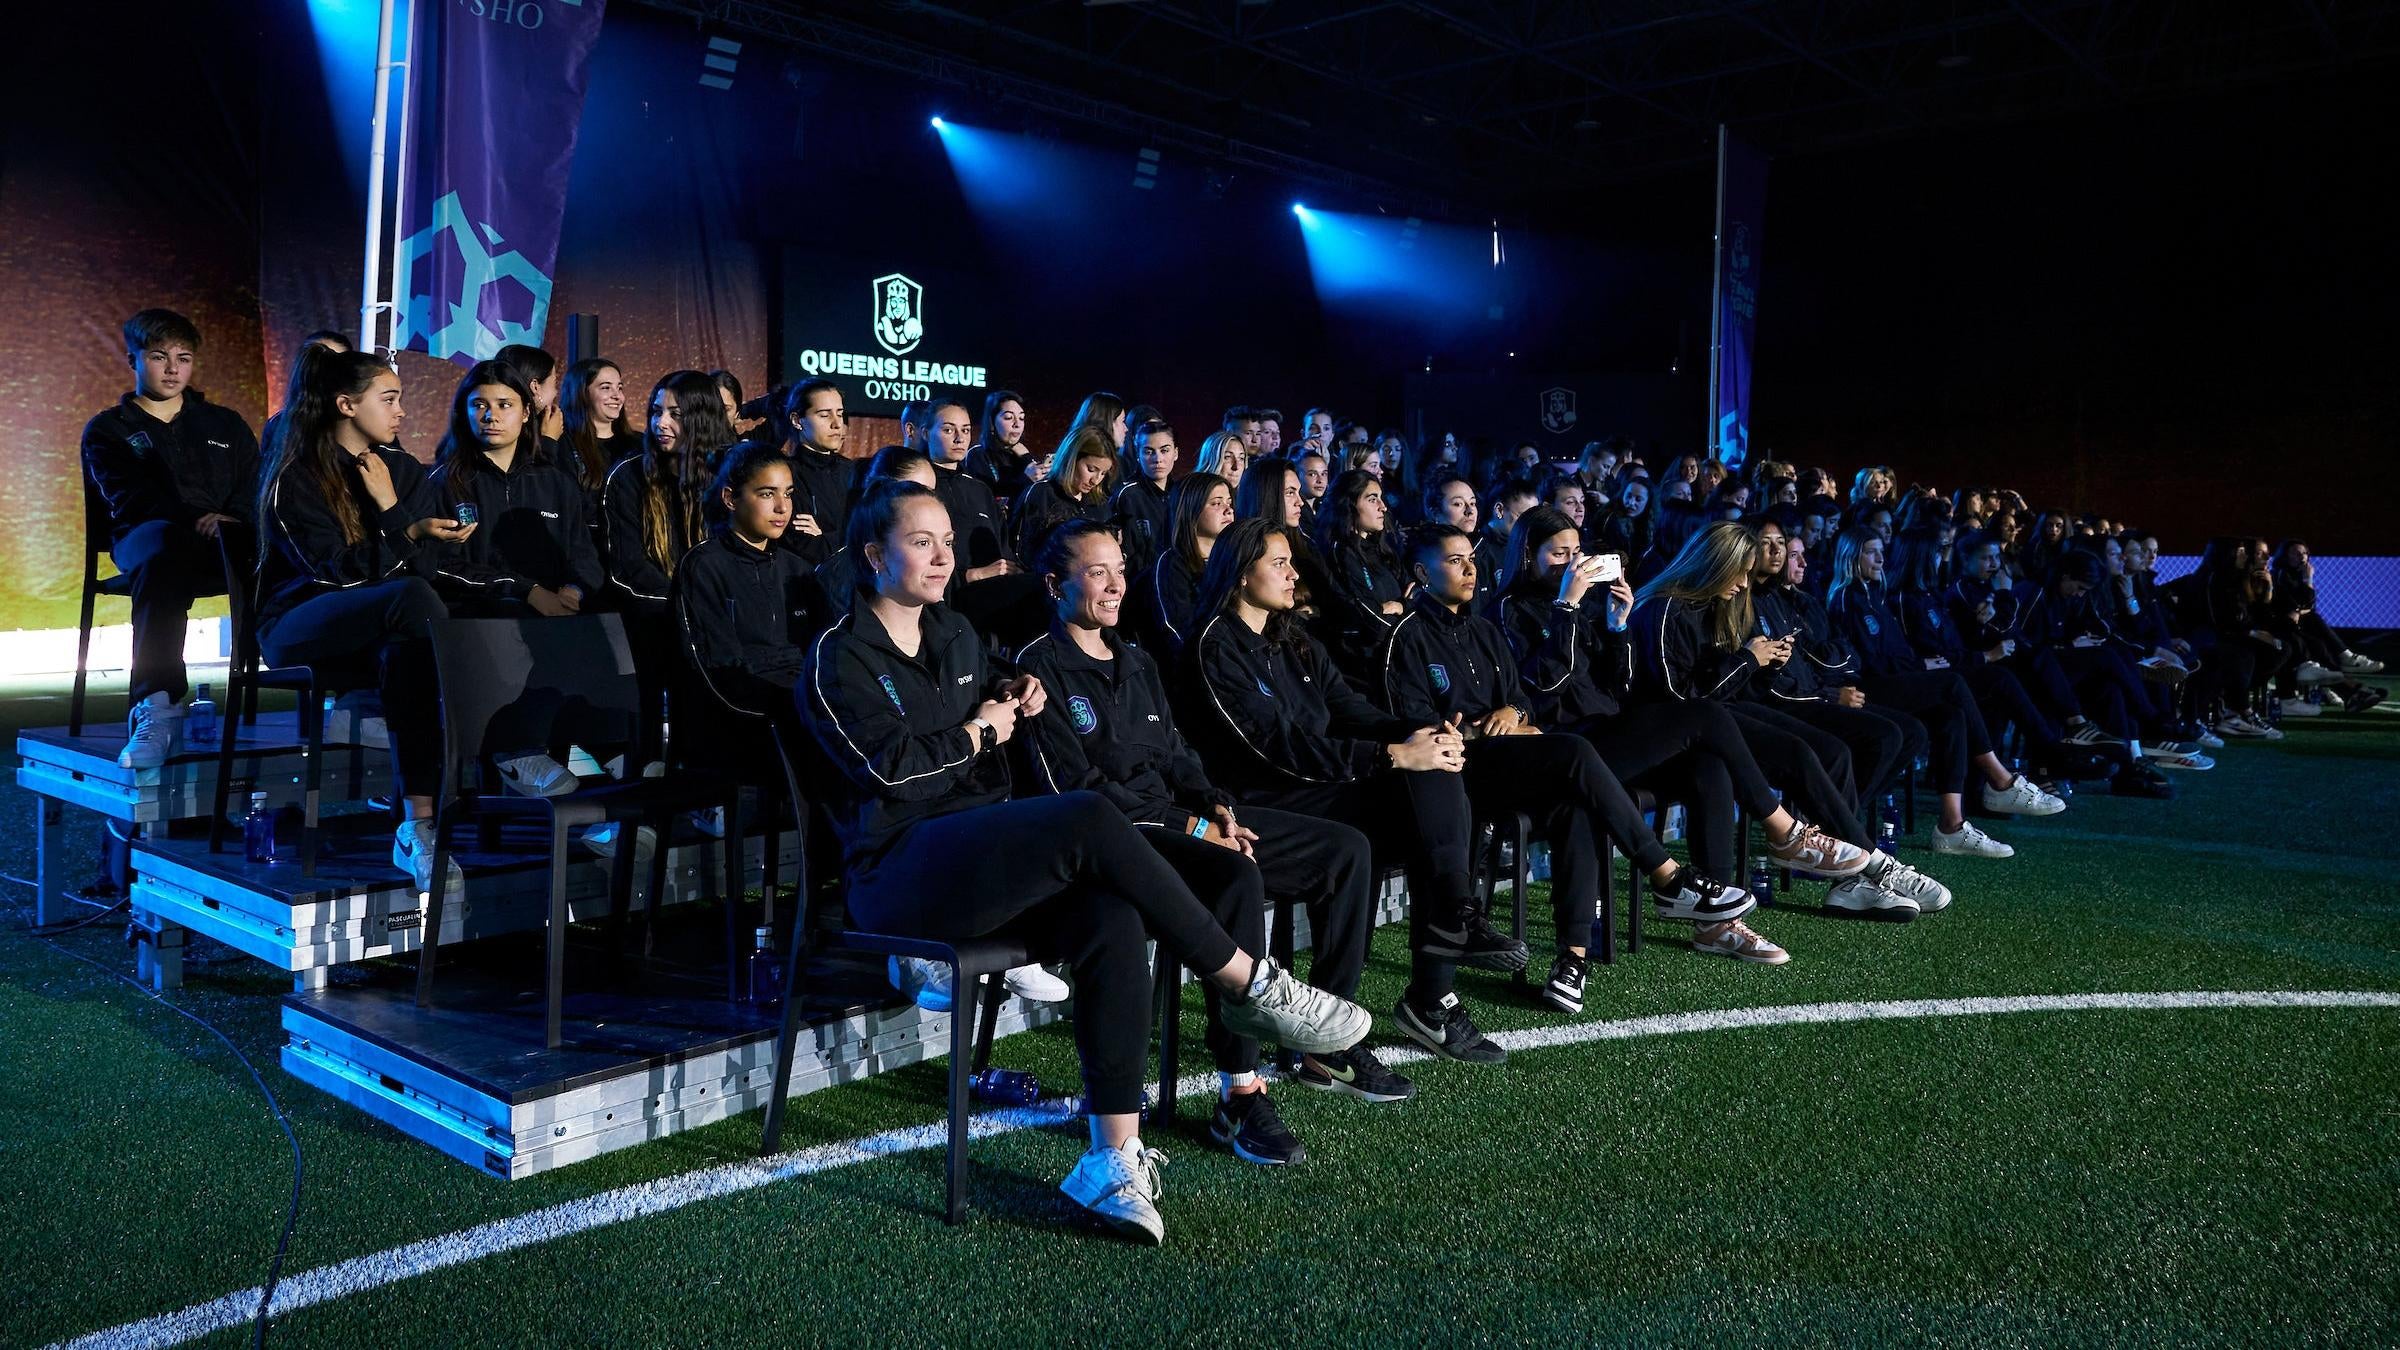 The potential Queens League players at the Cupra Arena on April 16 hoping to be chosen for a team. (Photo: Courtesy of Kosmos)